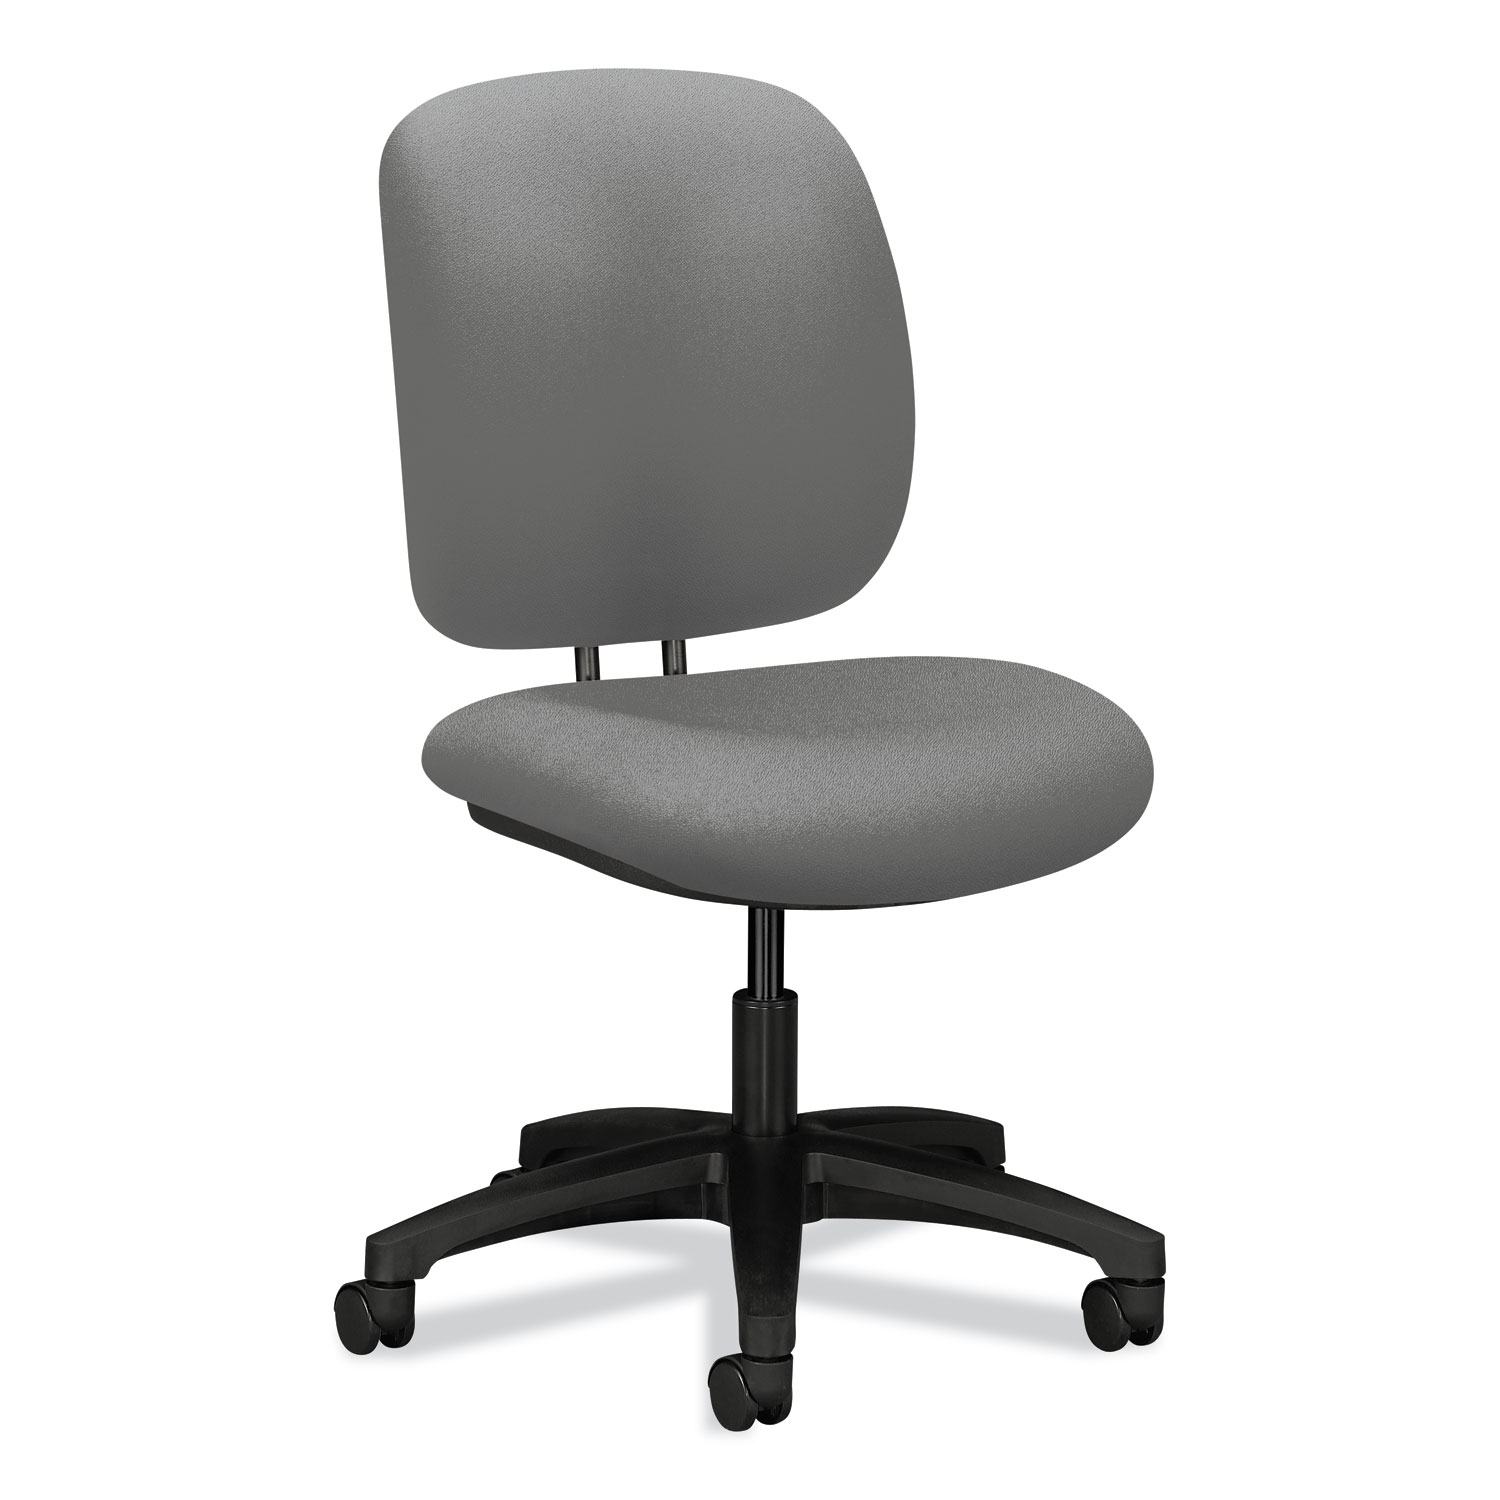  HON HON5901CU22T ComforTask Task Chair with Seat Glide Mechanism, Supports up to 300 lbs, Frost Seat, Frost Back, Black Base (HON5901CU22T) 